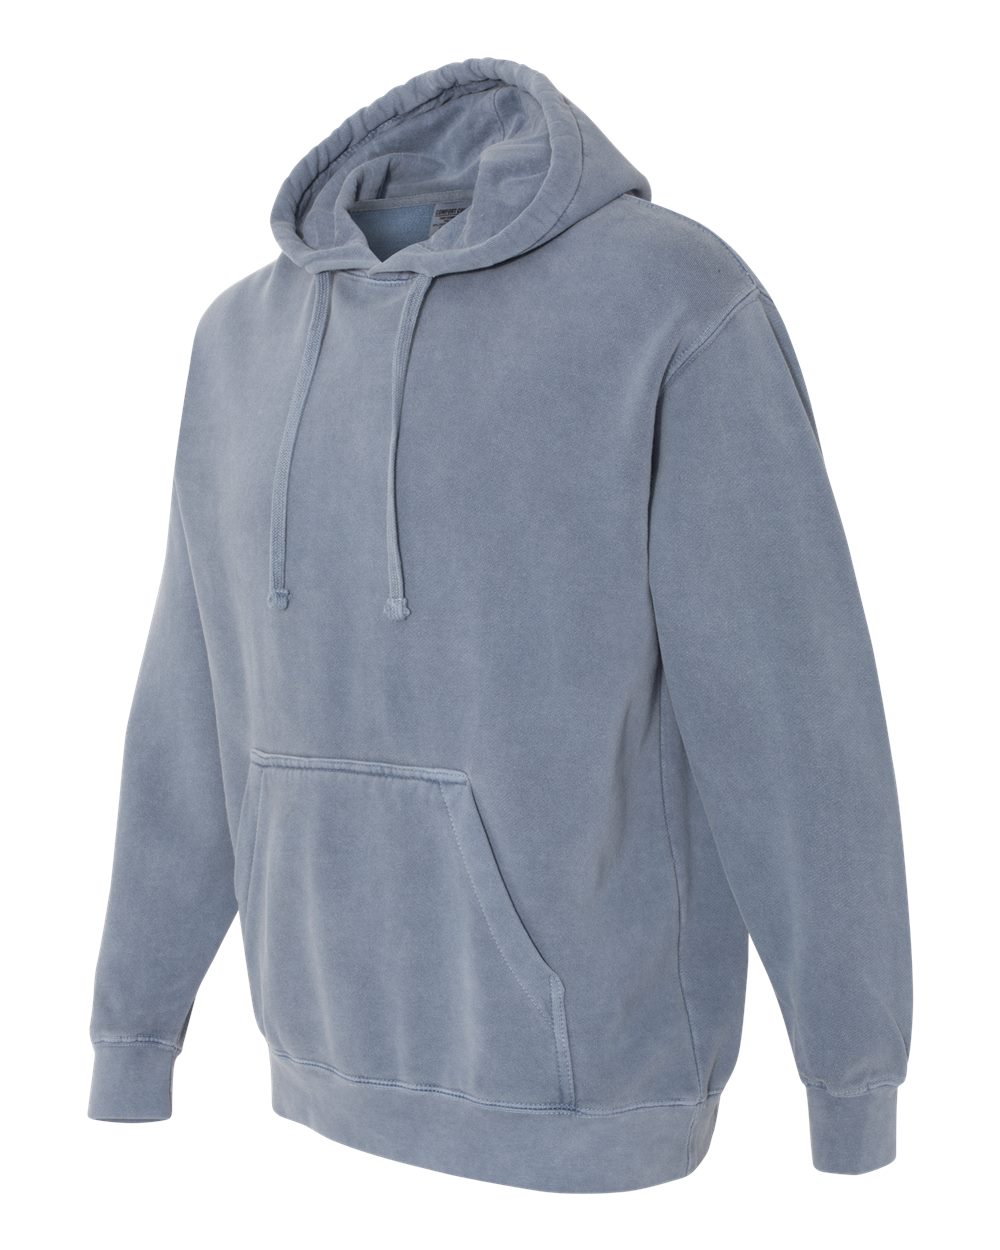 Comfort Colors 1567 - Garment Dyed Hooded Pullover Sweatshirt